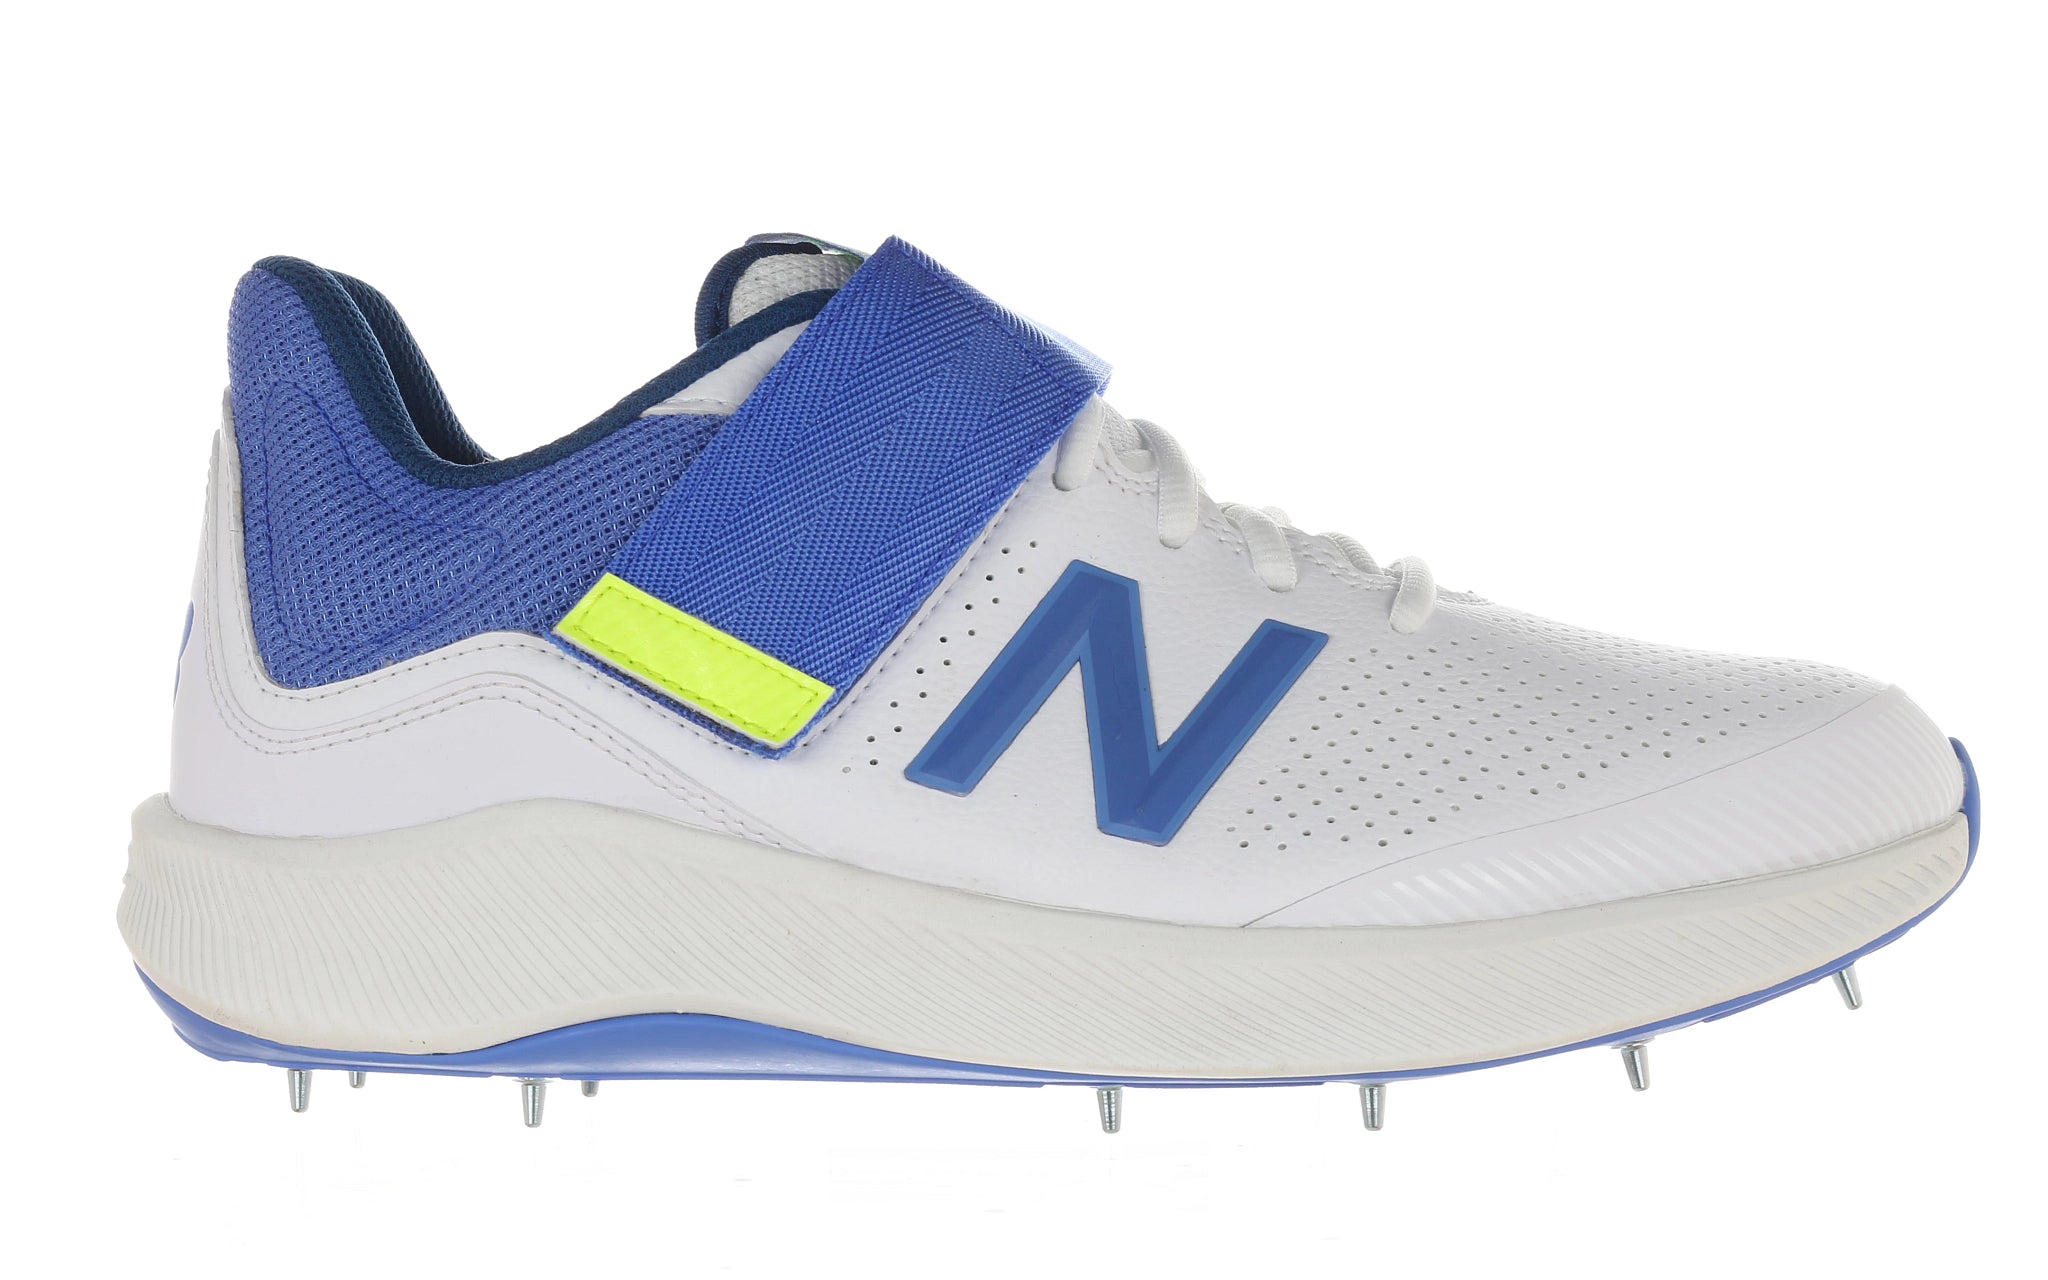 New Balance CK4040 Cricket Spikes White/Blue/Yellow - 2E Fit